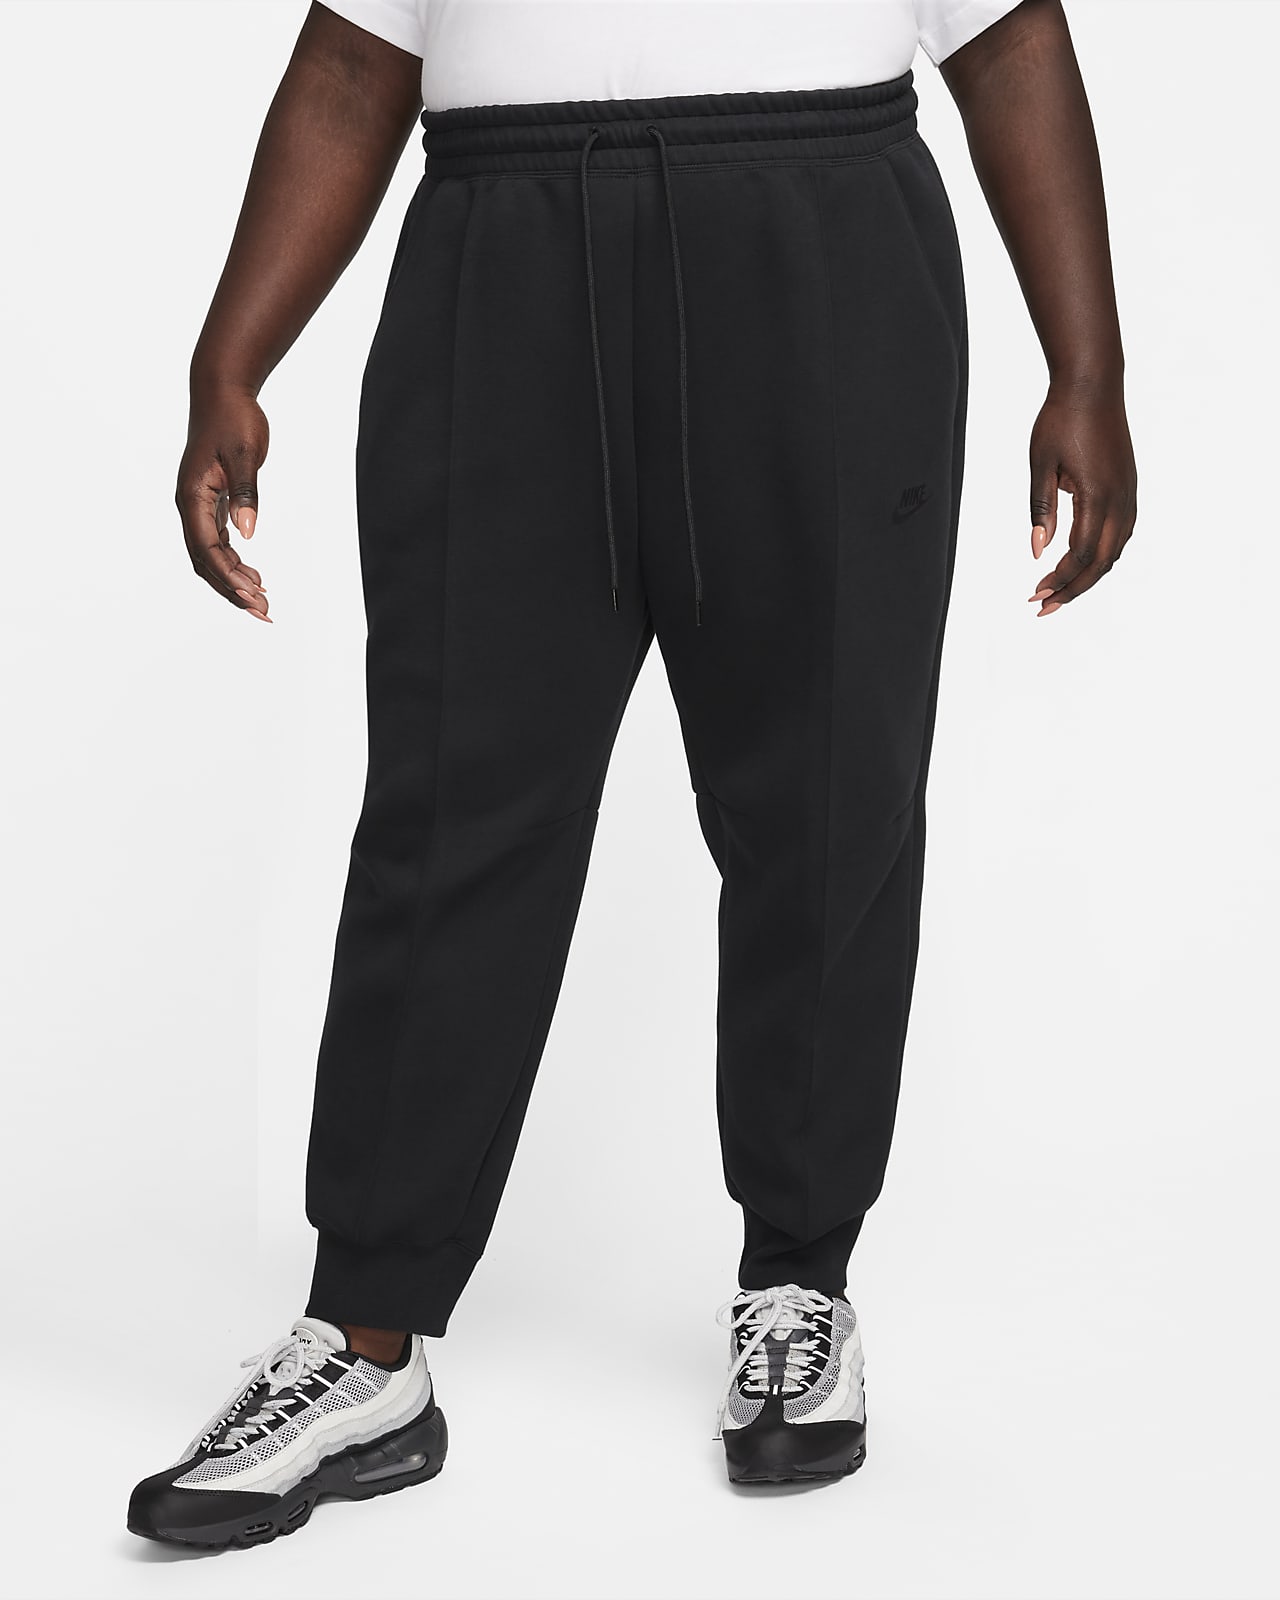 Standard Recycled Polyester Joggers & Sweatpants. Nike CA